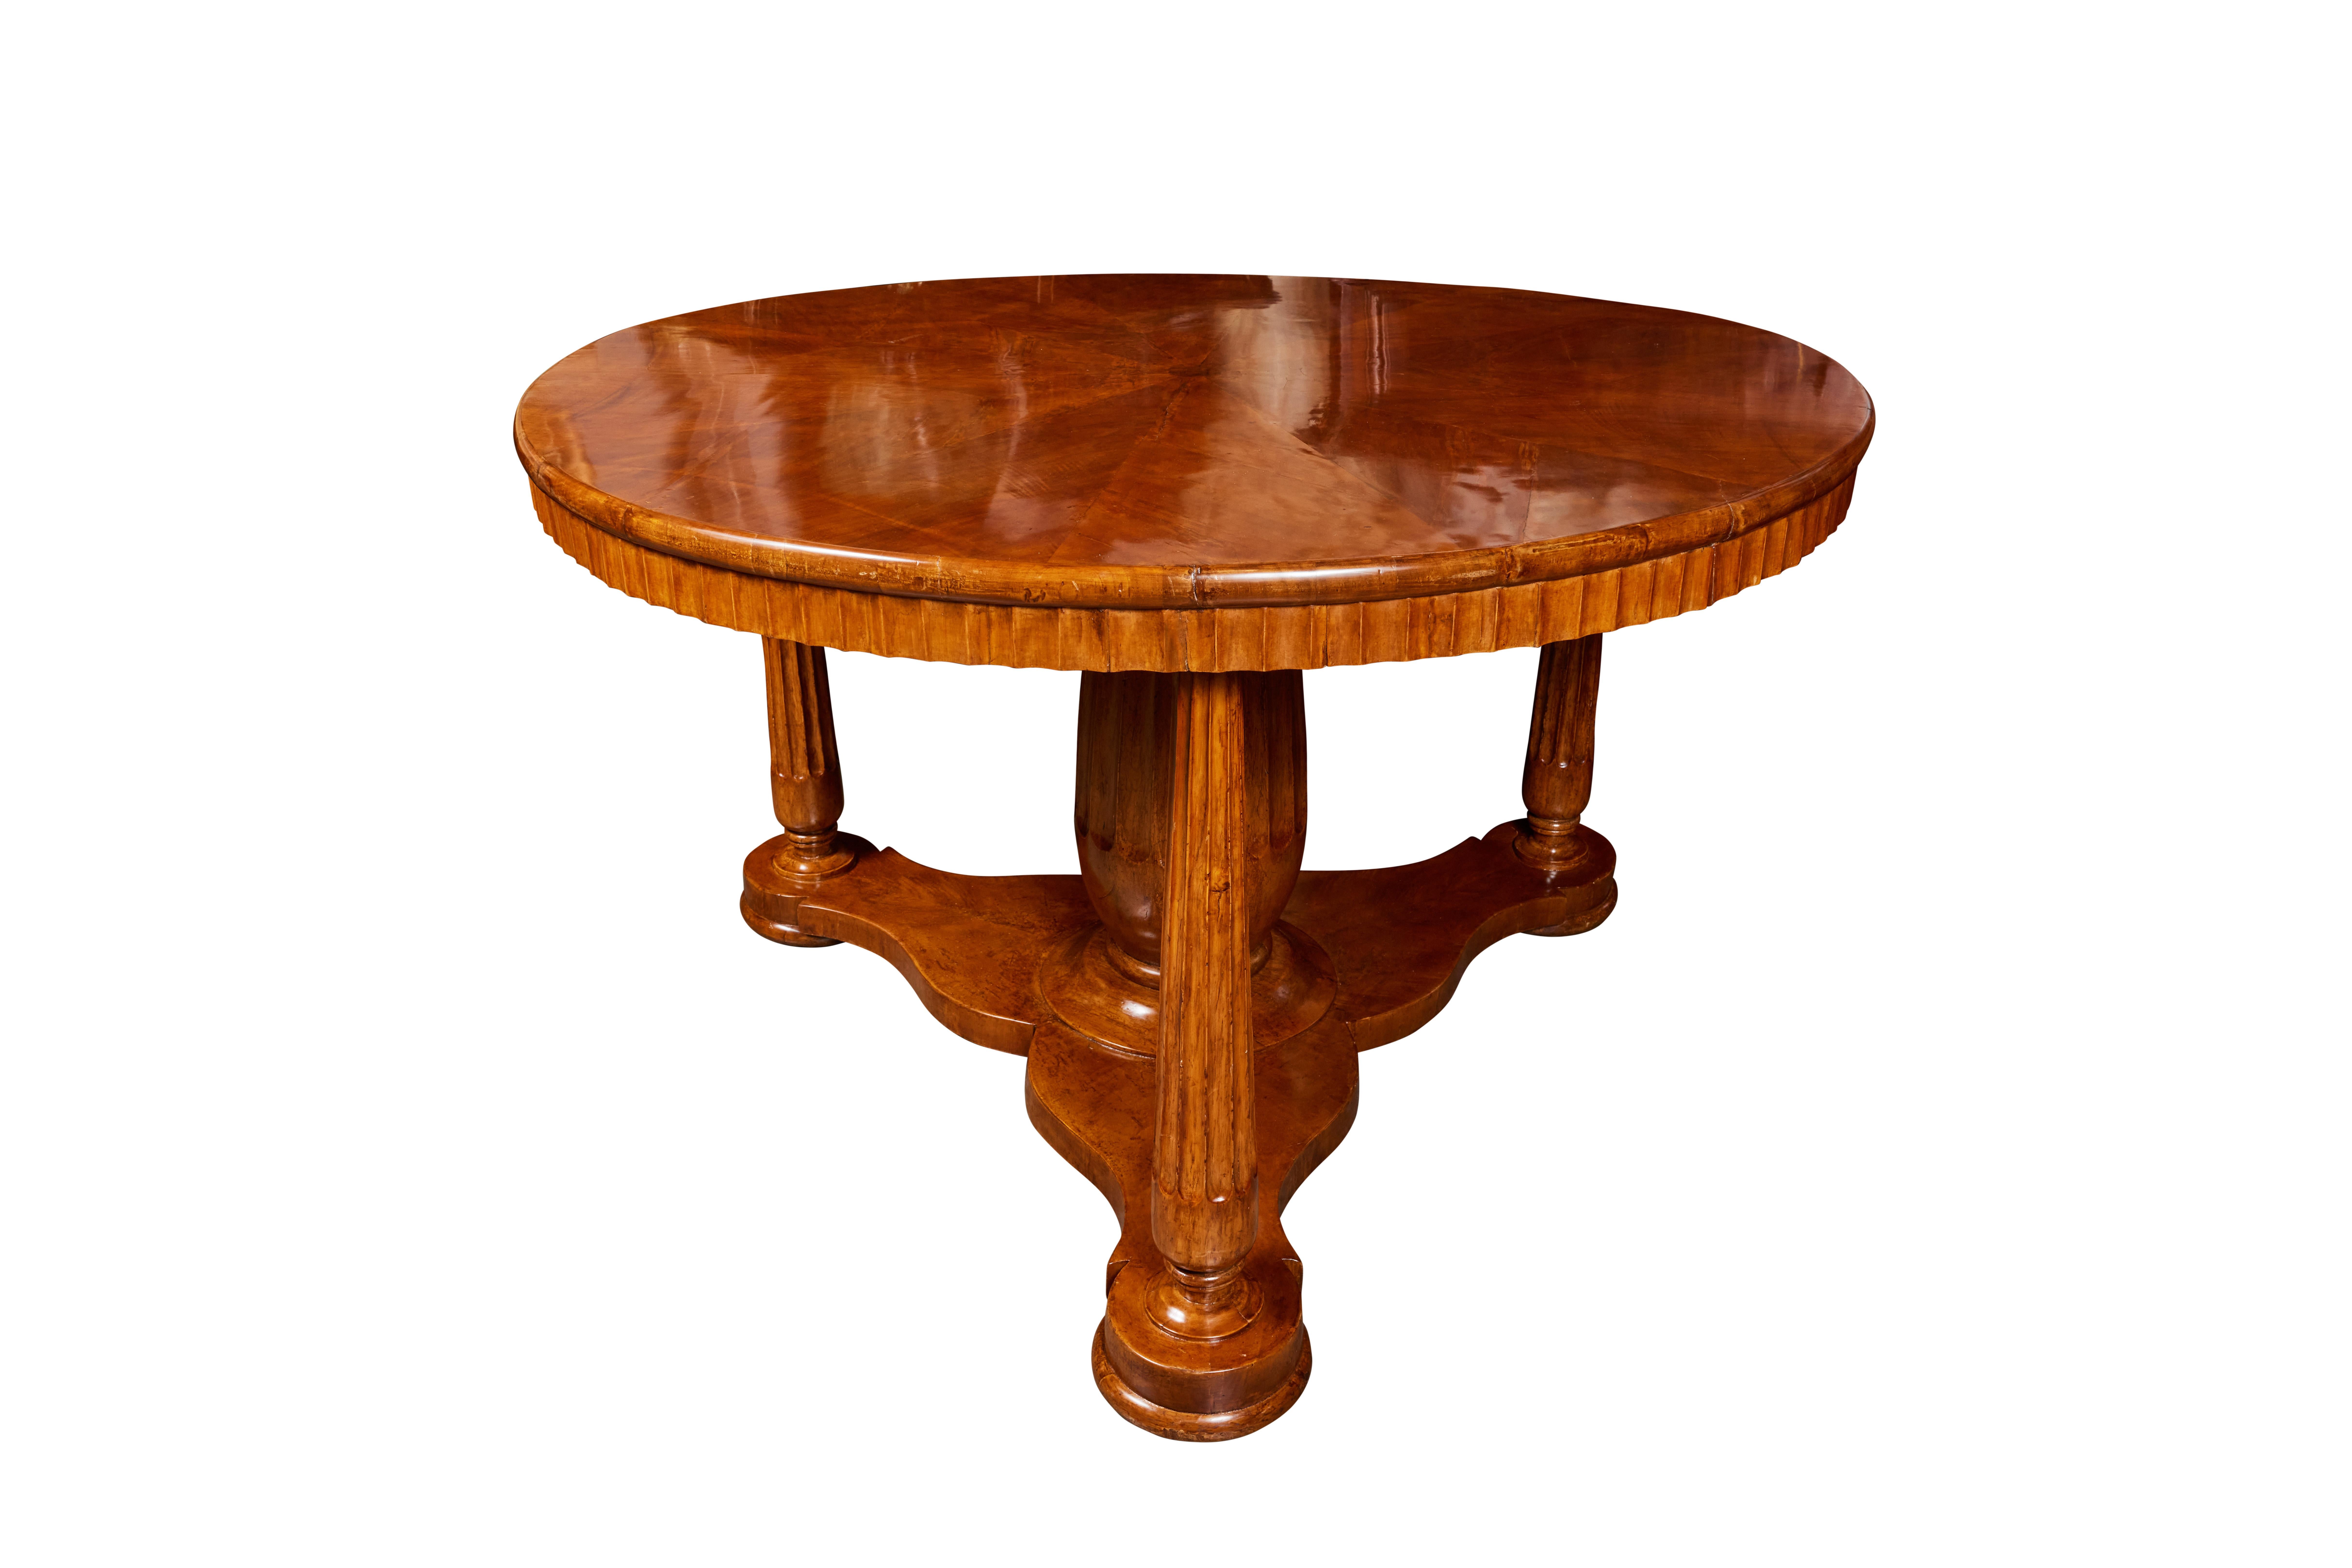 A beautiful, large, hand-carved walnut veneered center table on tapered, fluted legs above a unique, tri-petal base. The top surrounded by a matching, fluted edge.